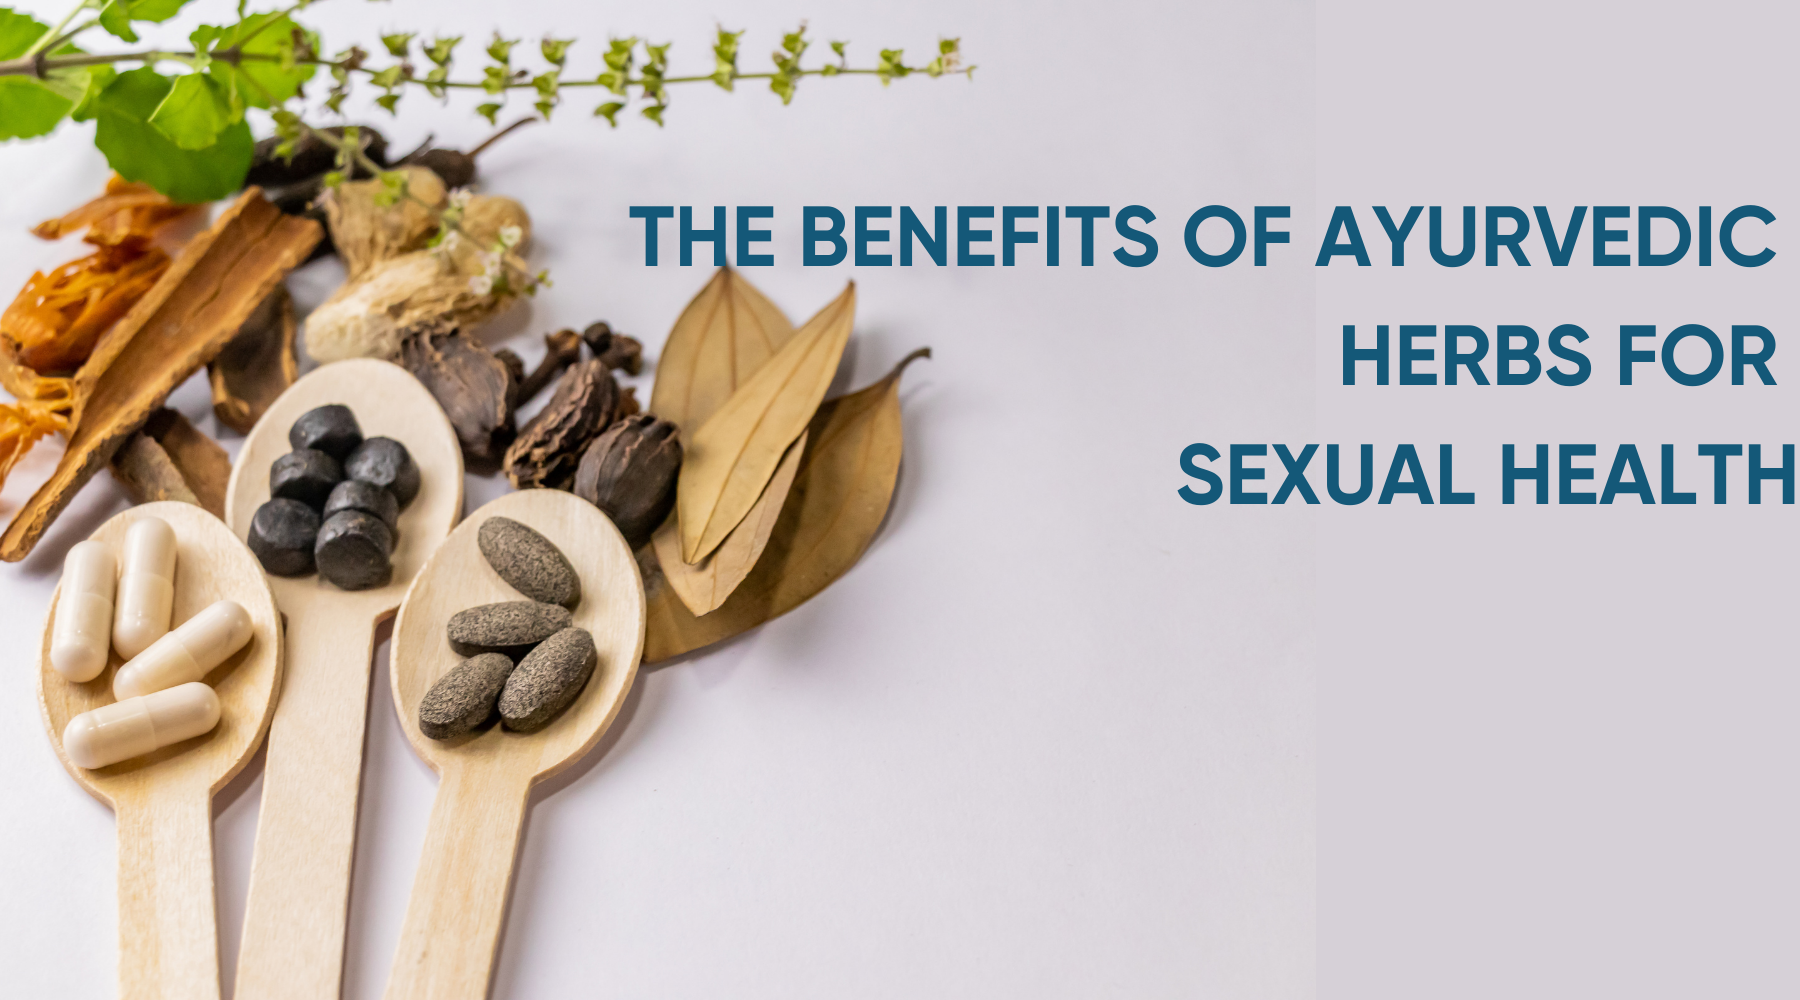 THE BENEFITS OF AYURVEDIC HERBS FOR SEXUAL HEALTH